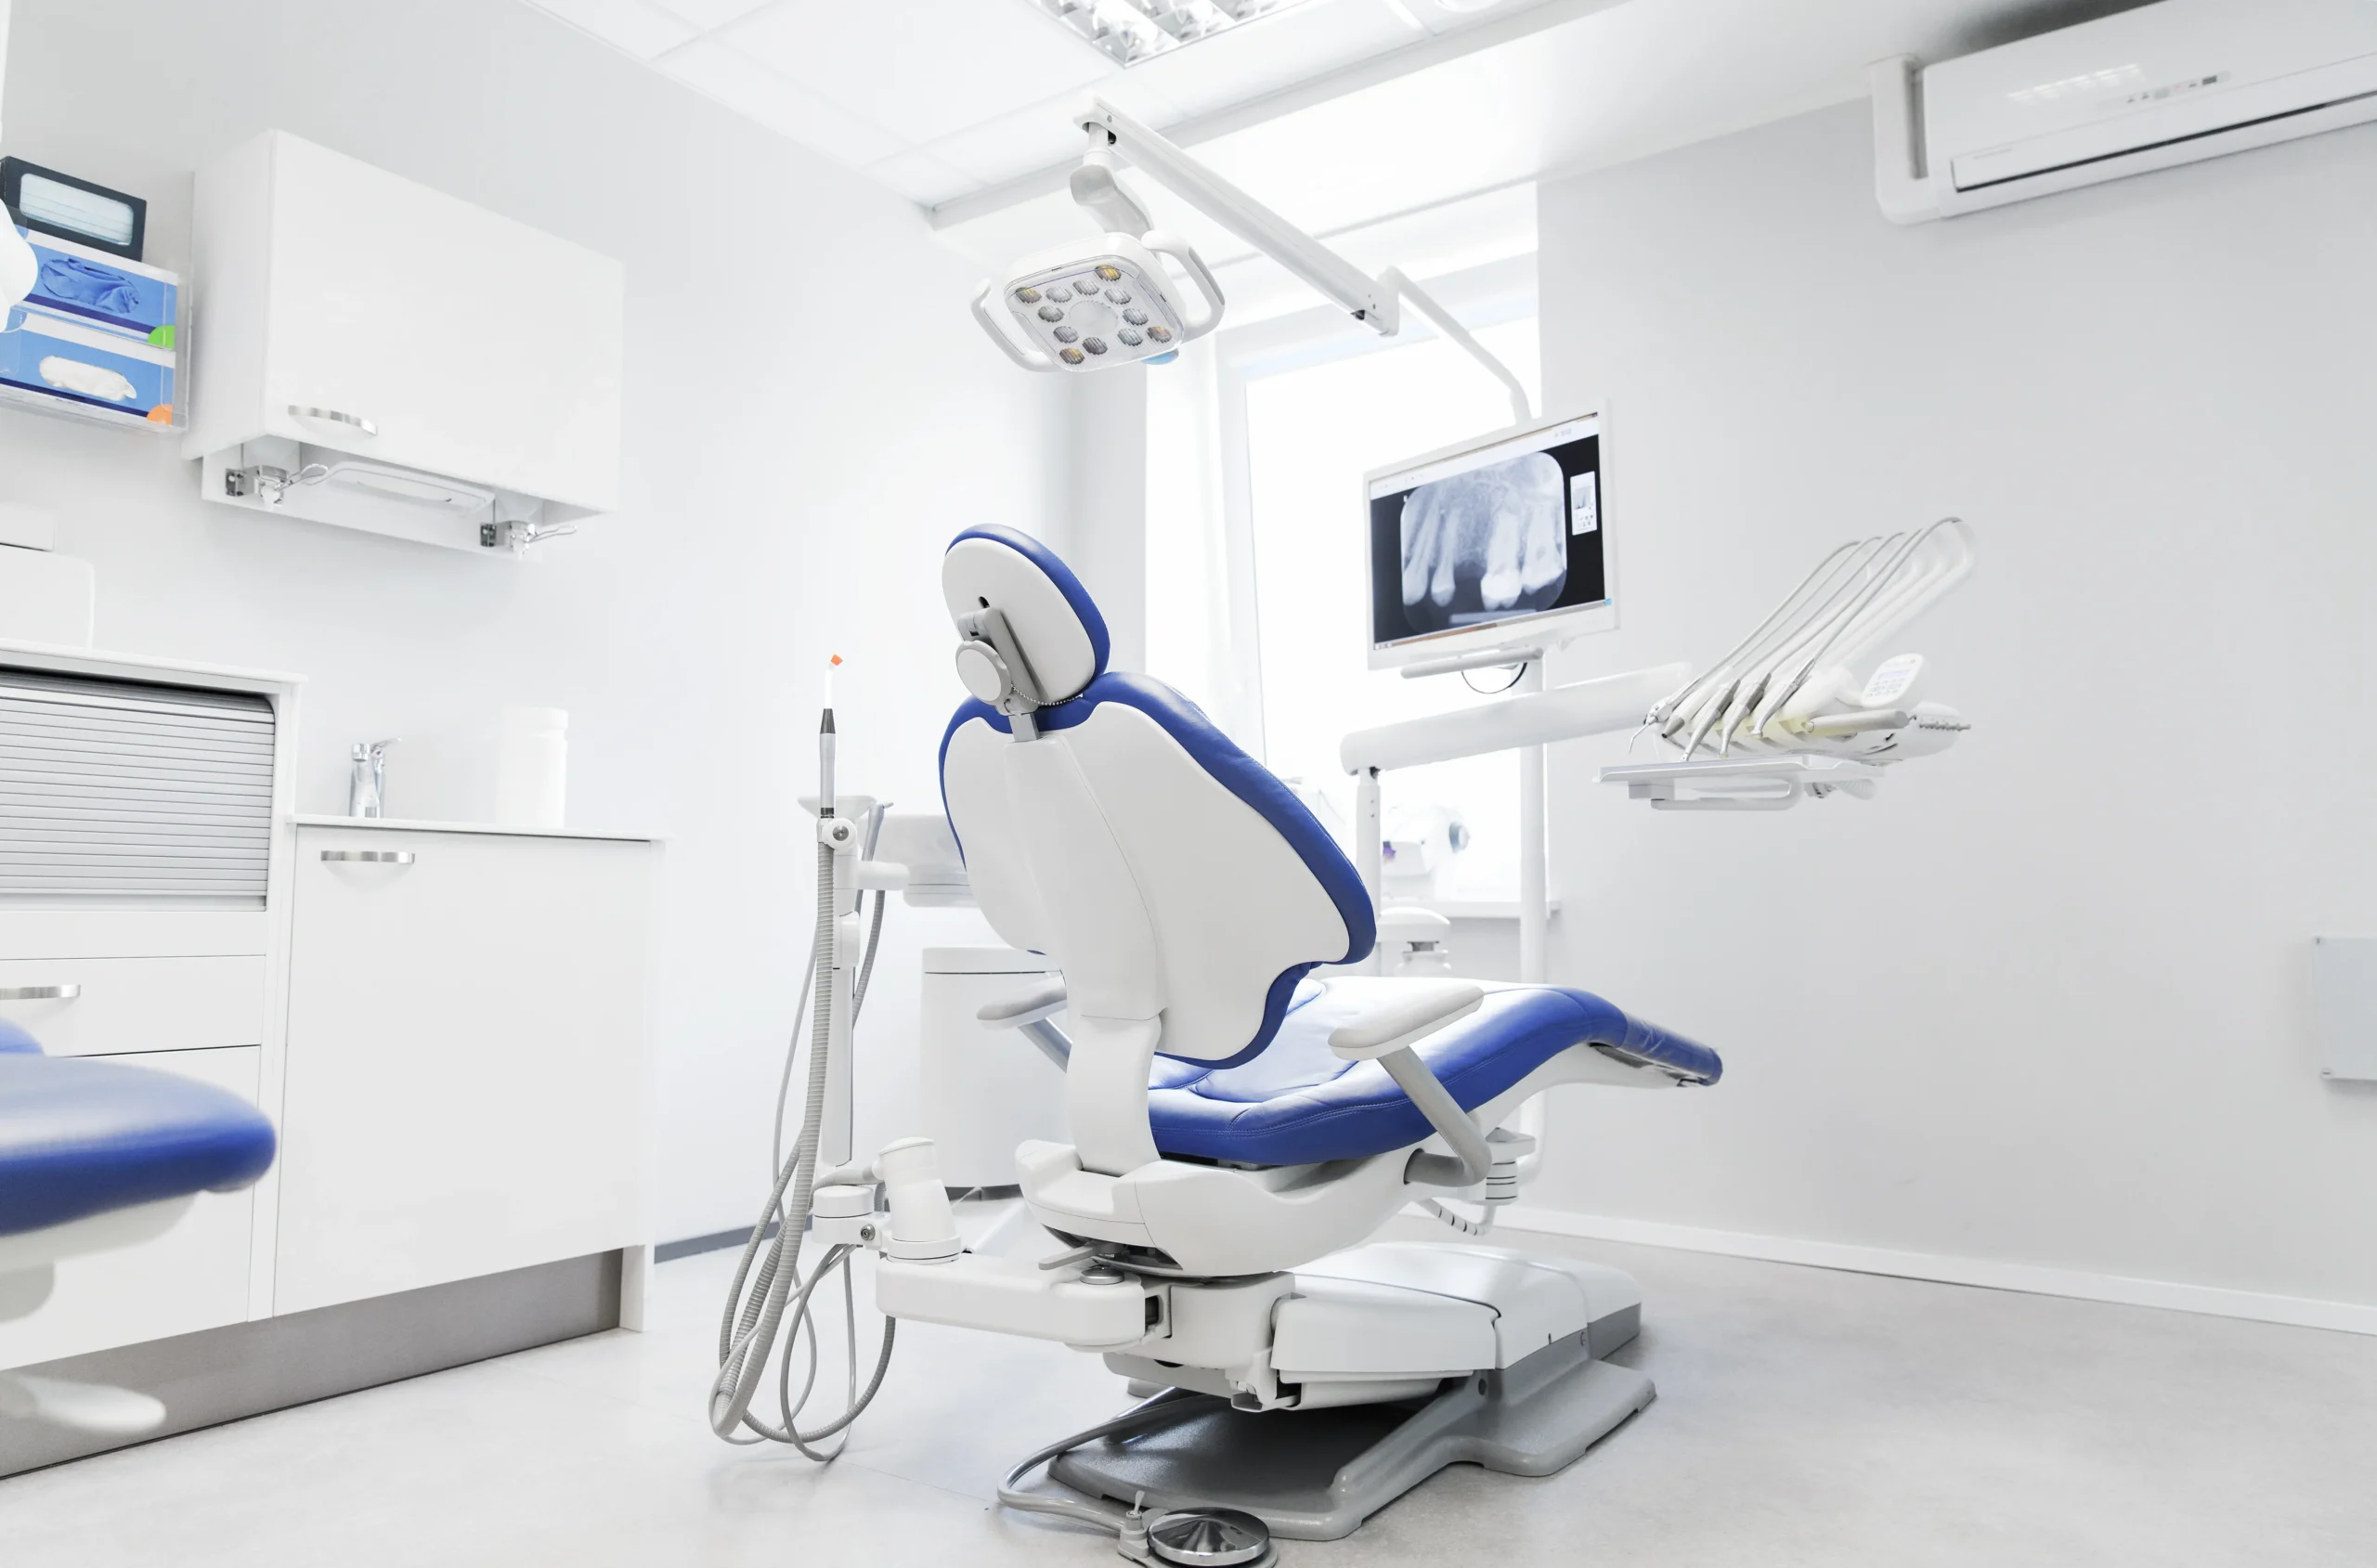 Dental Equipment for Practices scaled - Home